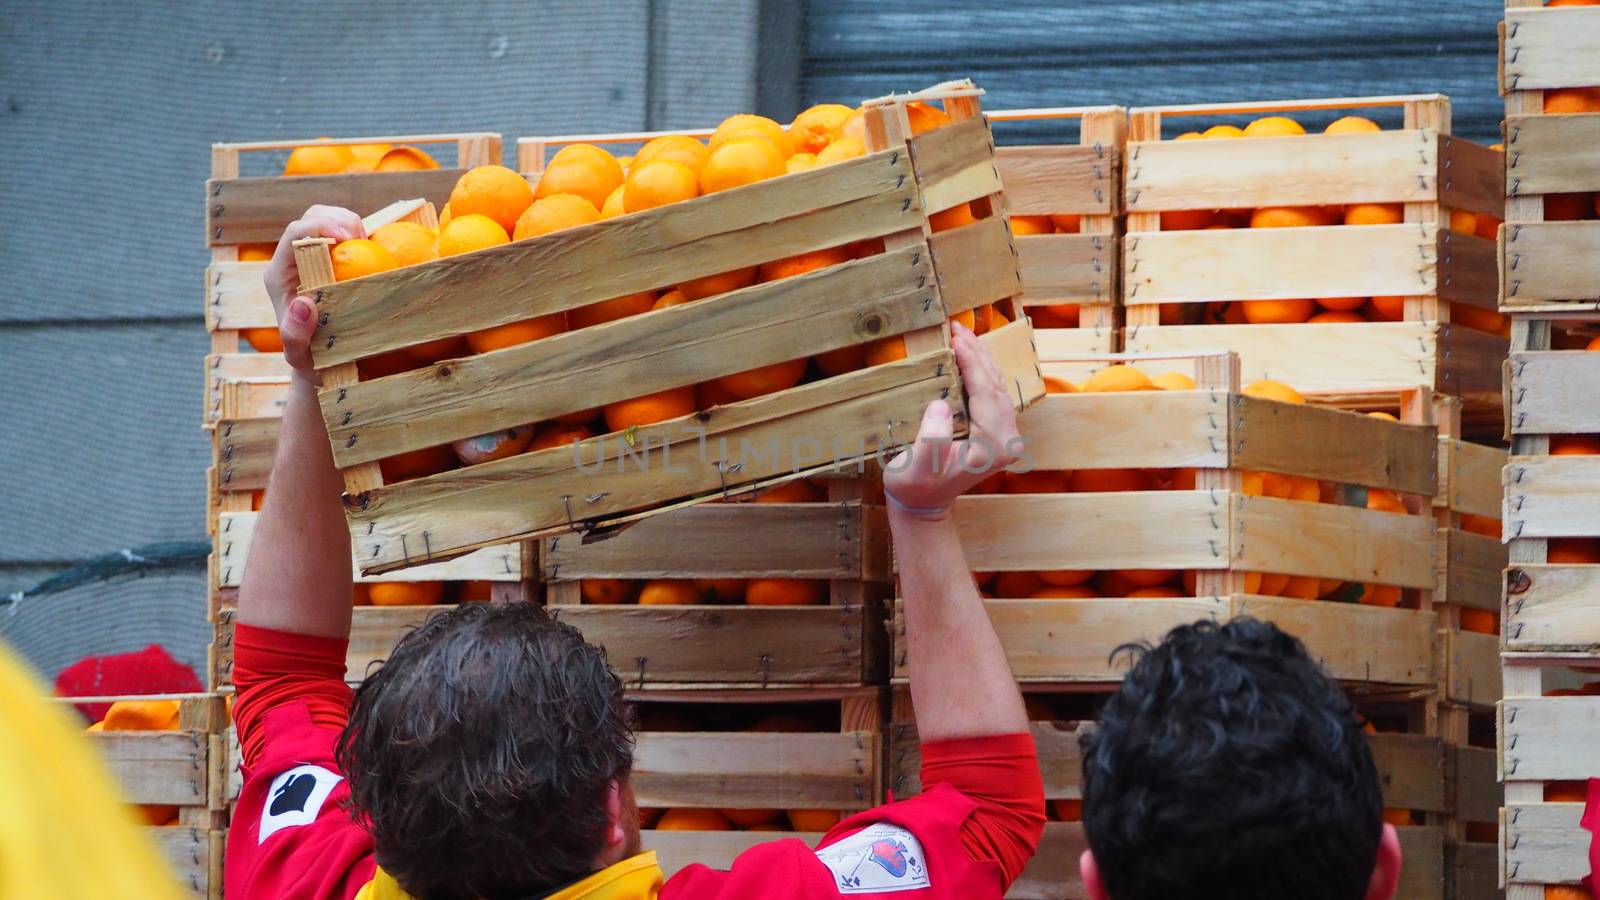 ITALY, Ivrea: People unload crates of oranges on February 7, 2016.An estimated 7,000 people turned out to pelt each other at the historic festival. 70 people were injured by the flying fruit.